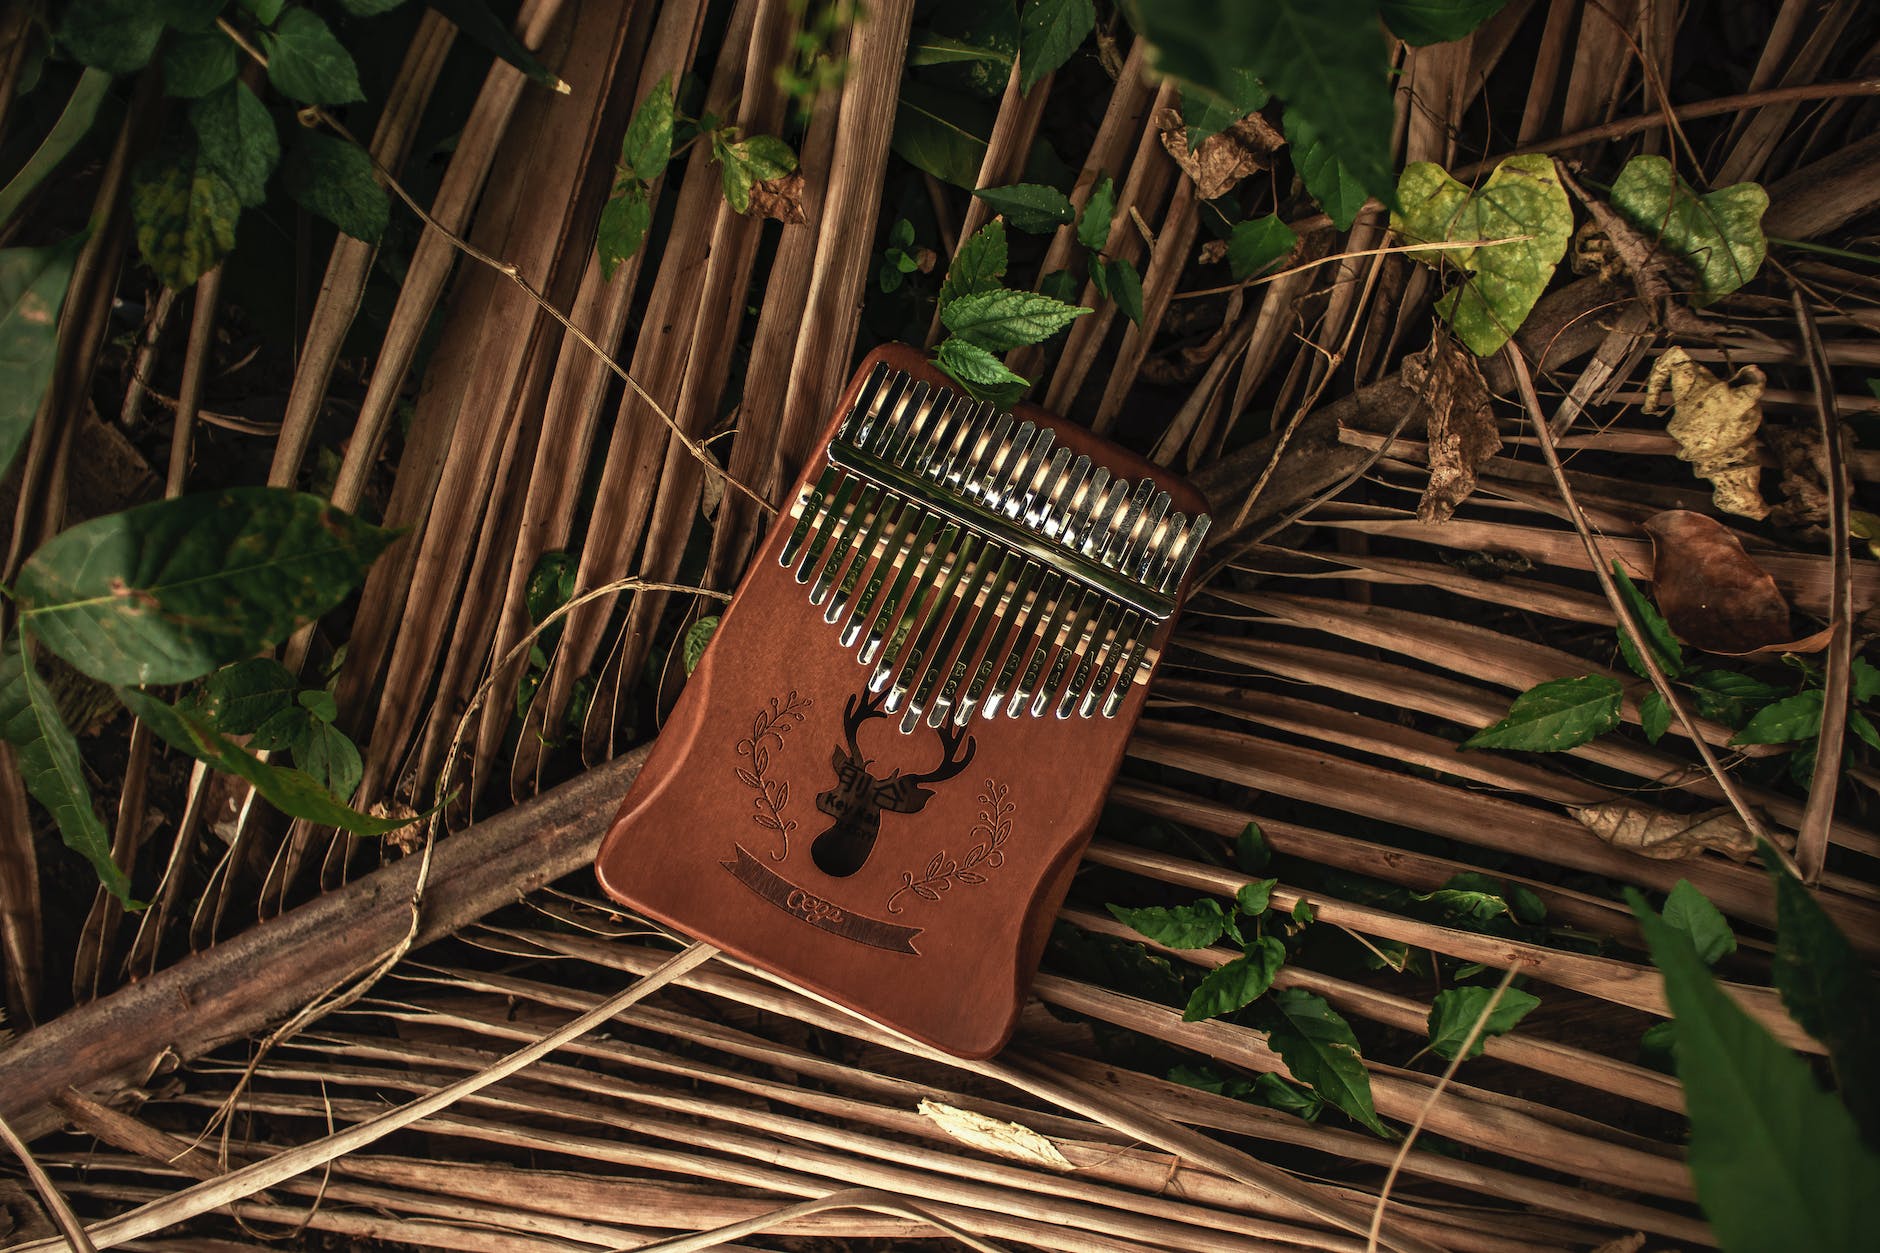 wooden kalimba forgotten on dry branch of palm in nature